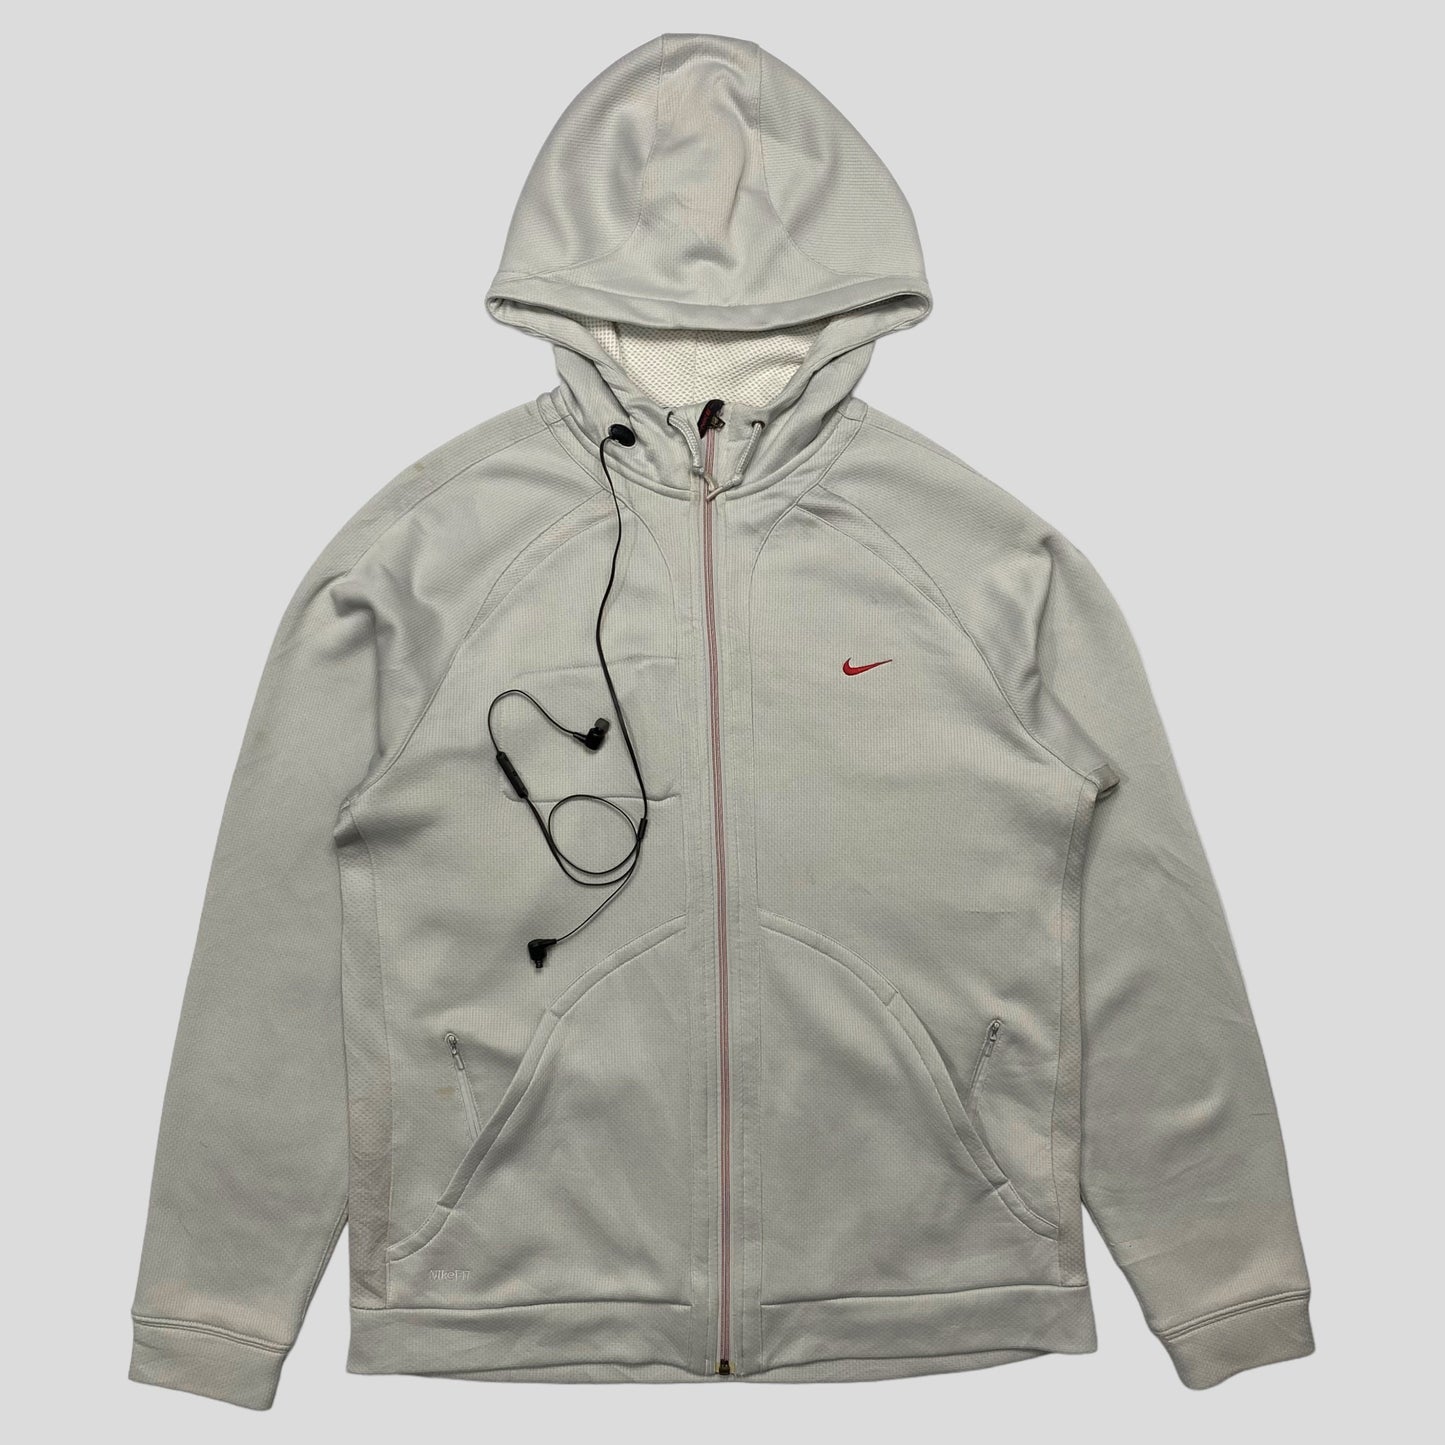 Nike ‘06 Climafit Panelled MP3 Hoodie - M